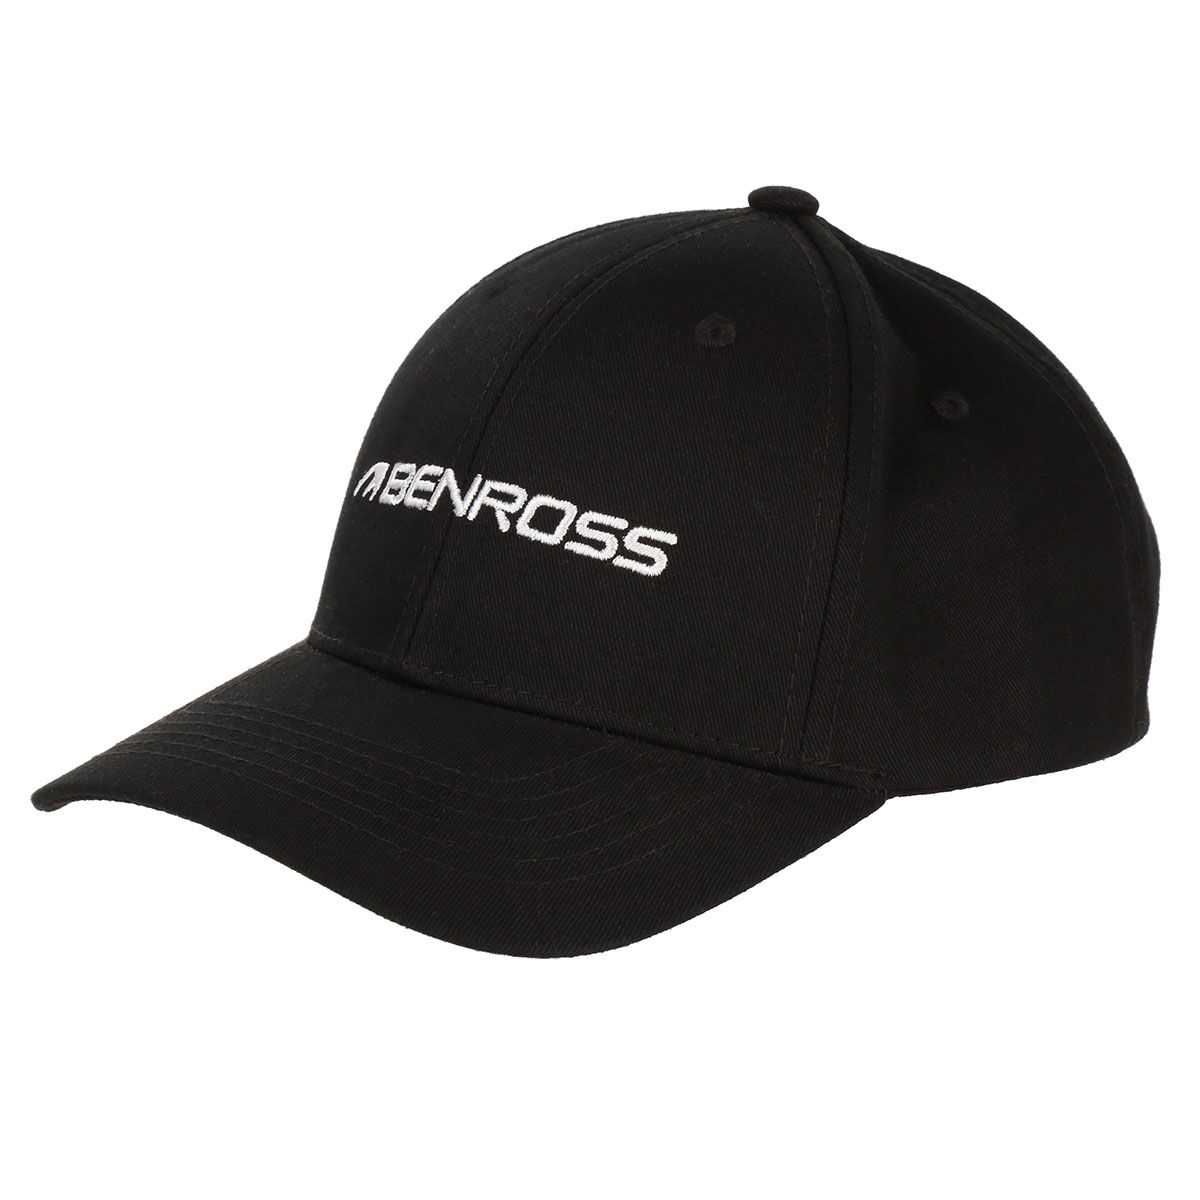 Benross Black and White Embroidered Men's Core Logo Golf Cap | American Golf, One Size von Benross